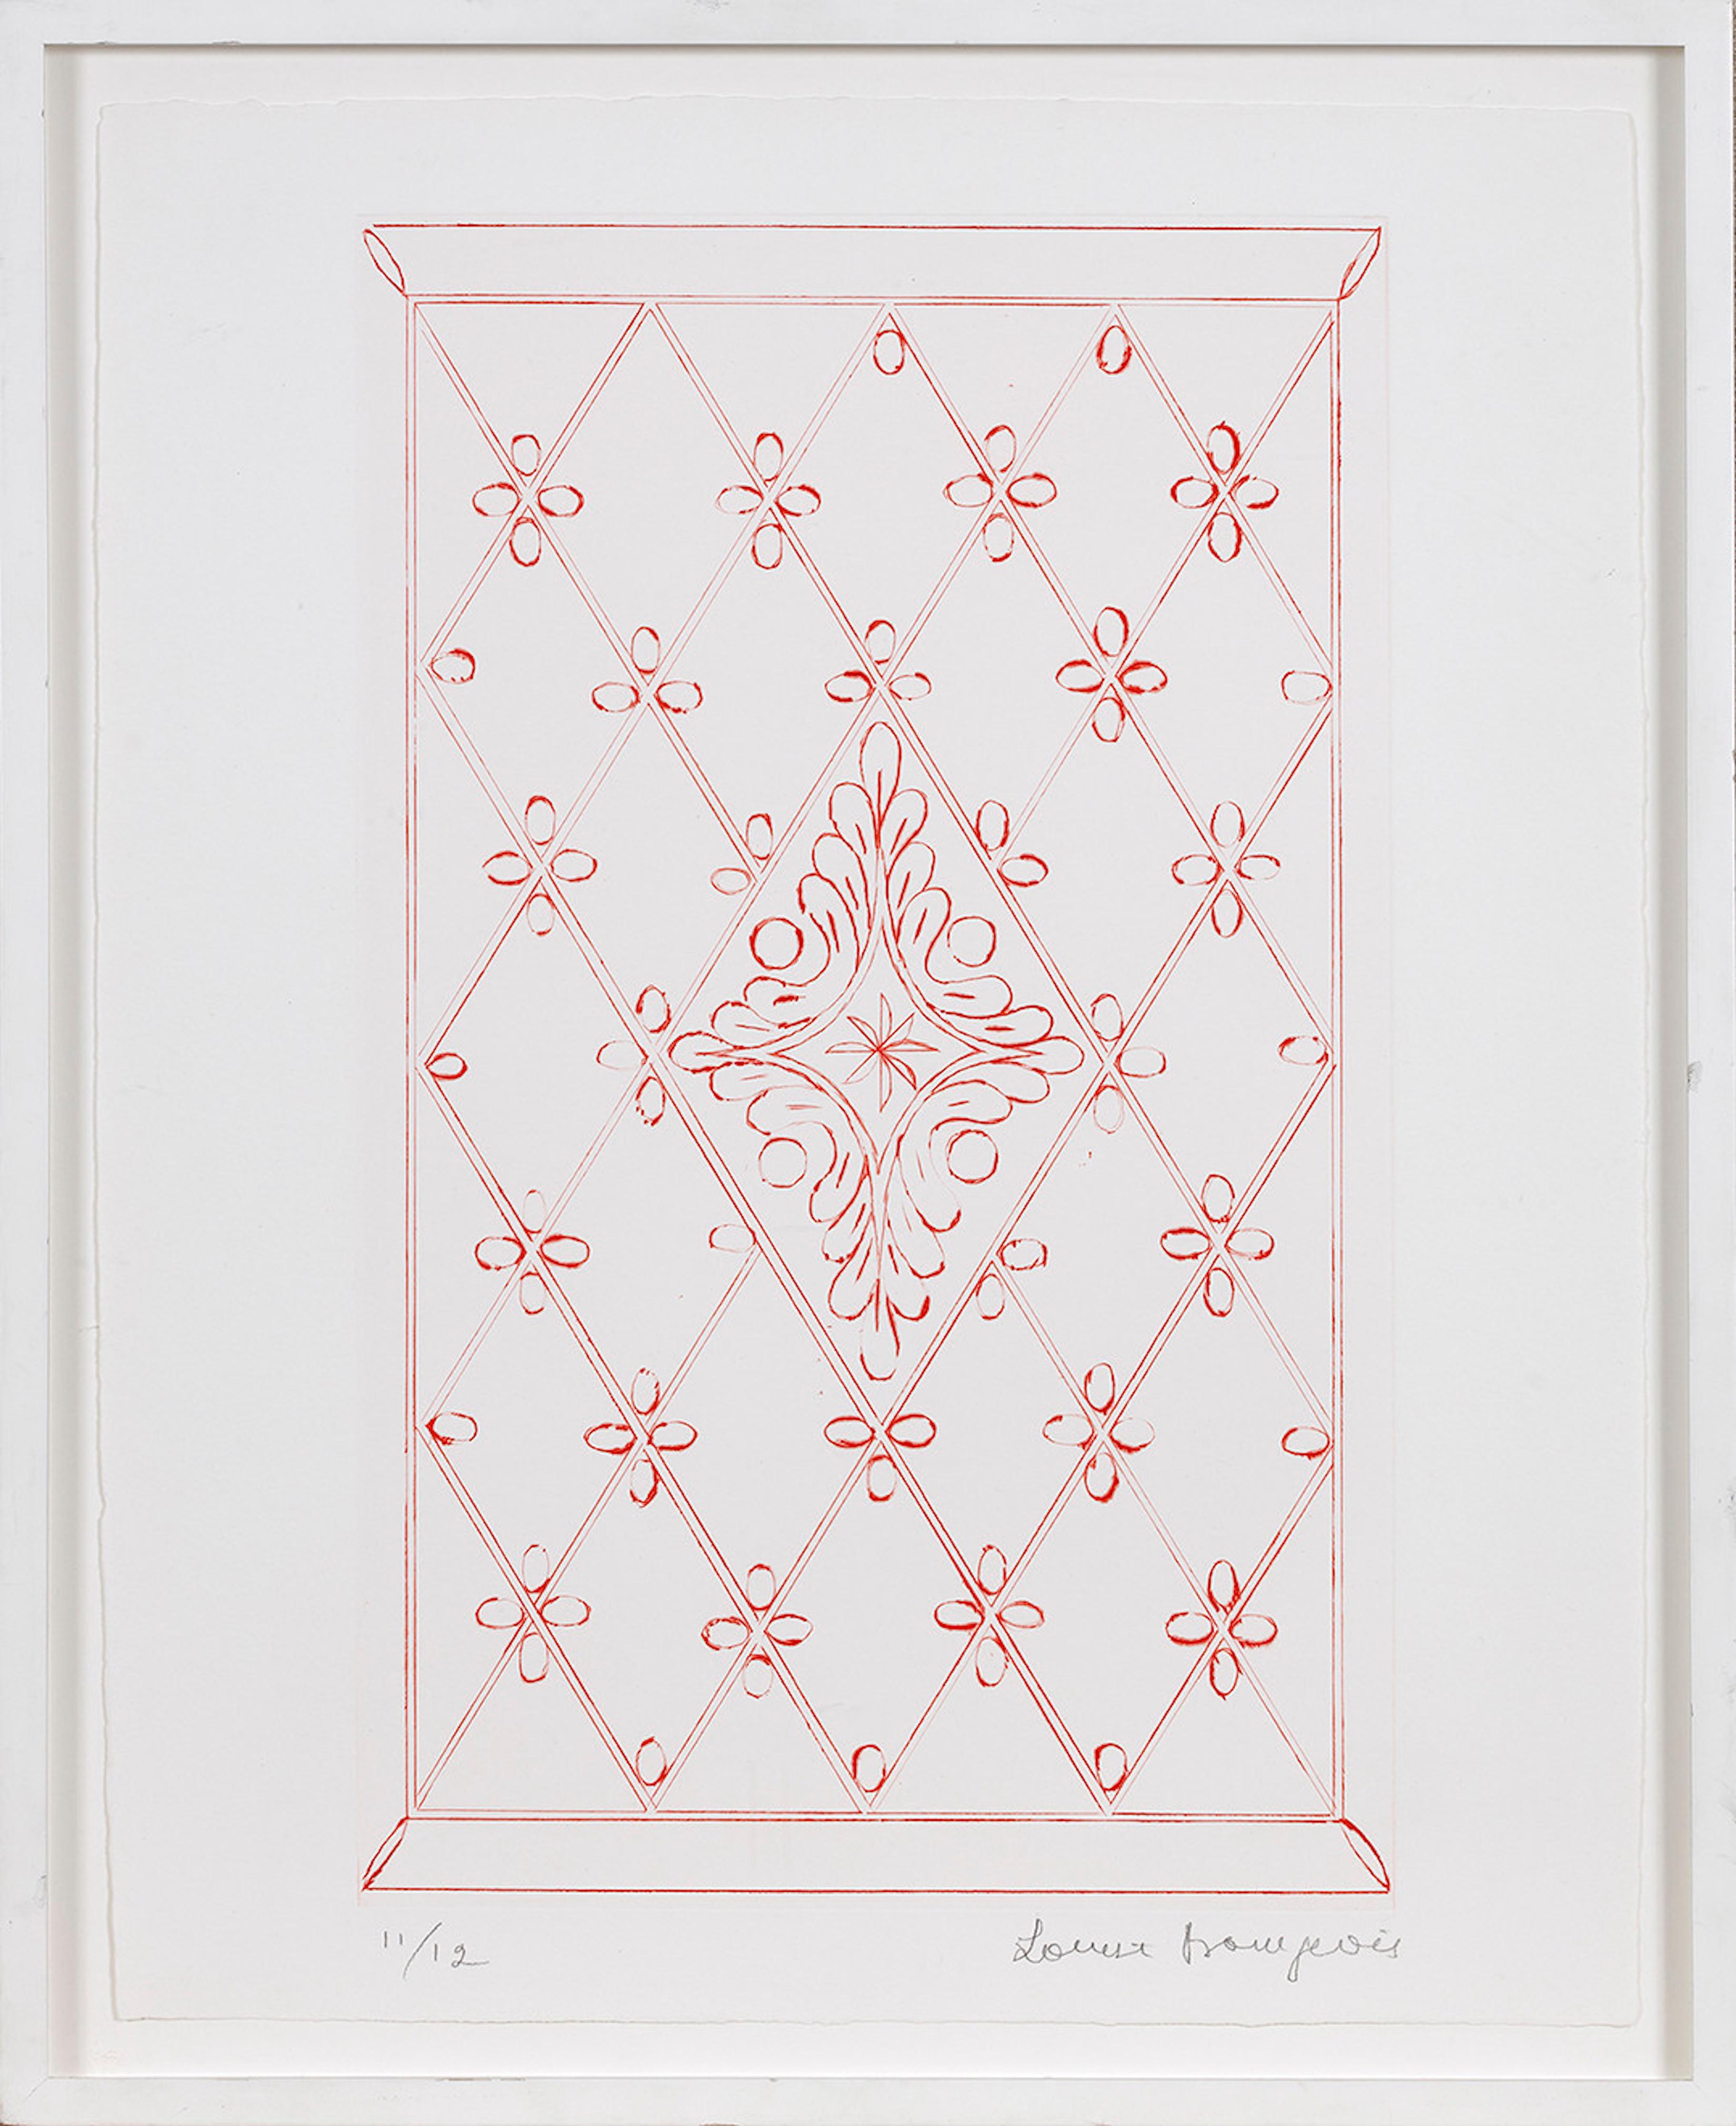 Louise Bourgeois Abstract Print - Where I Live